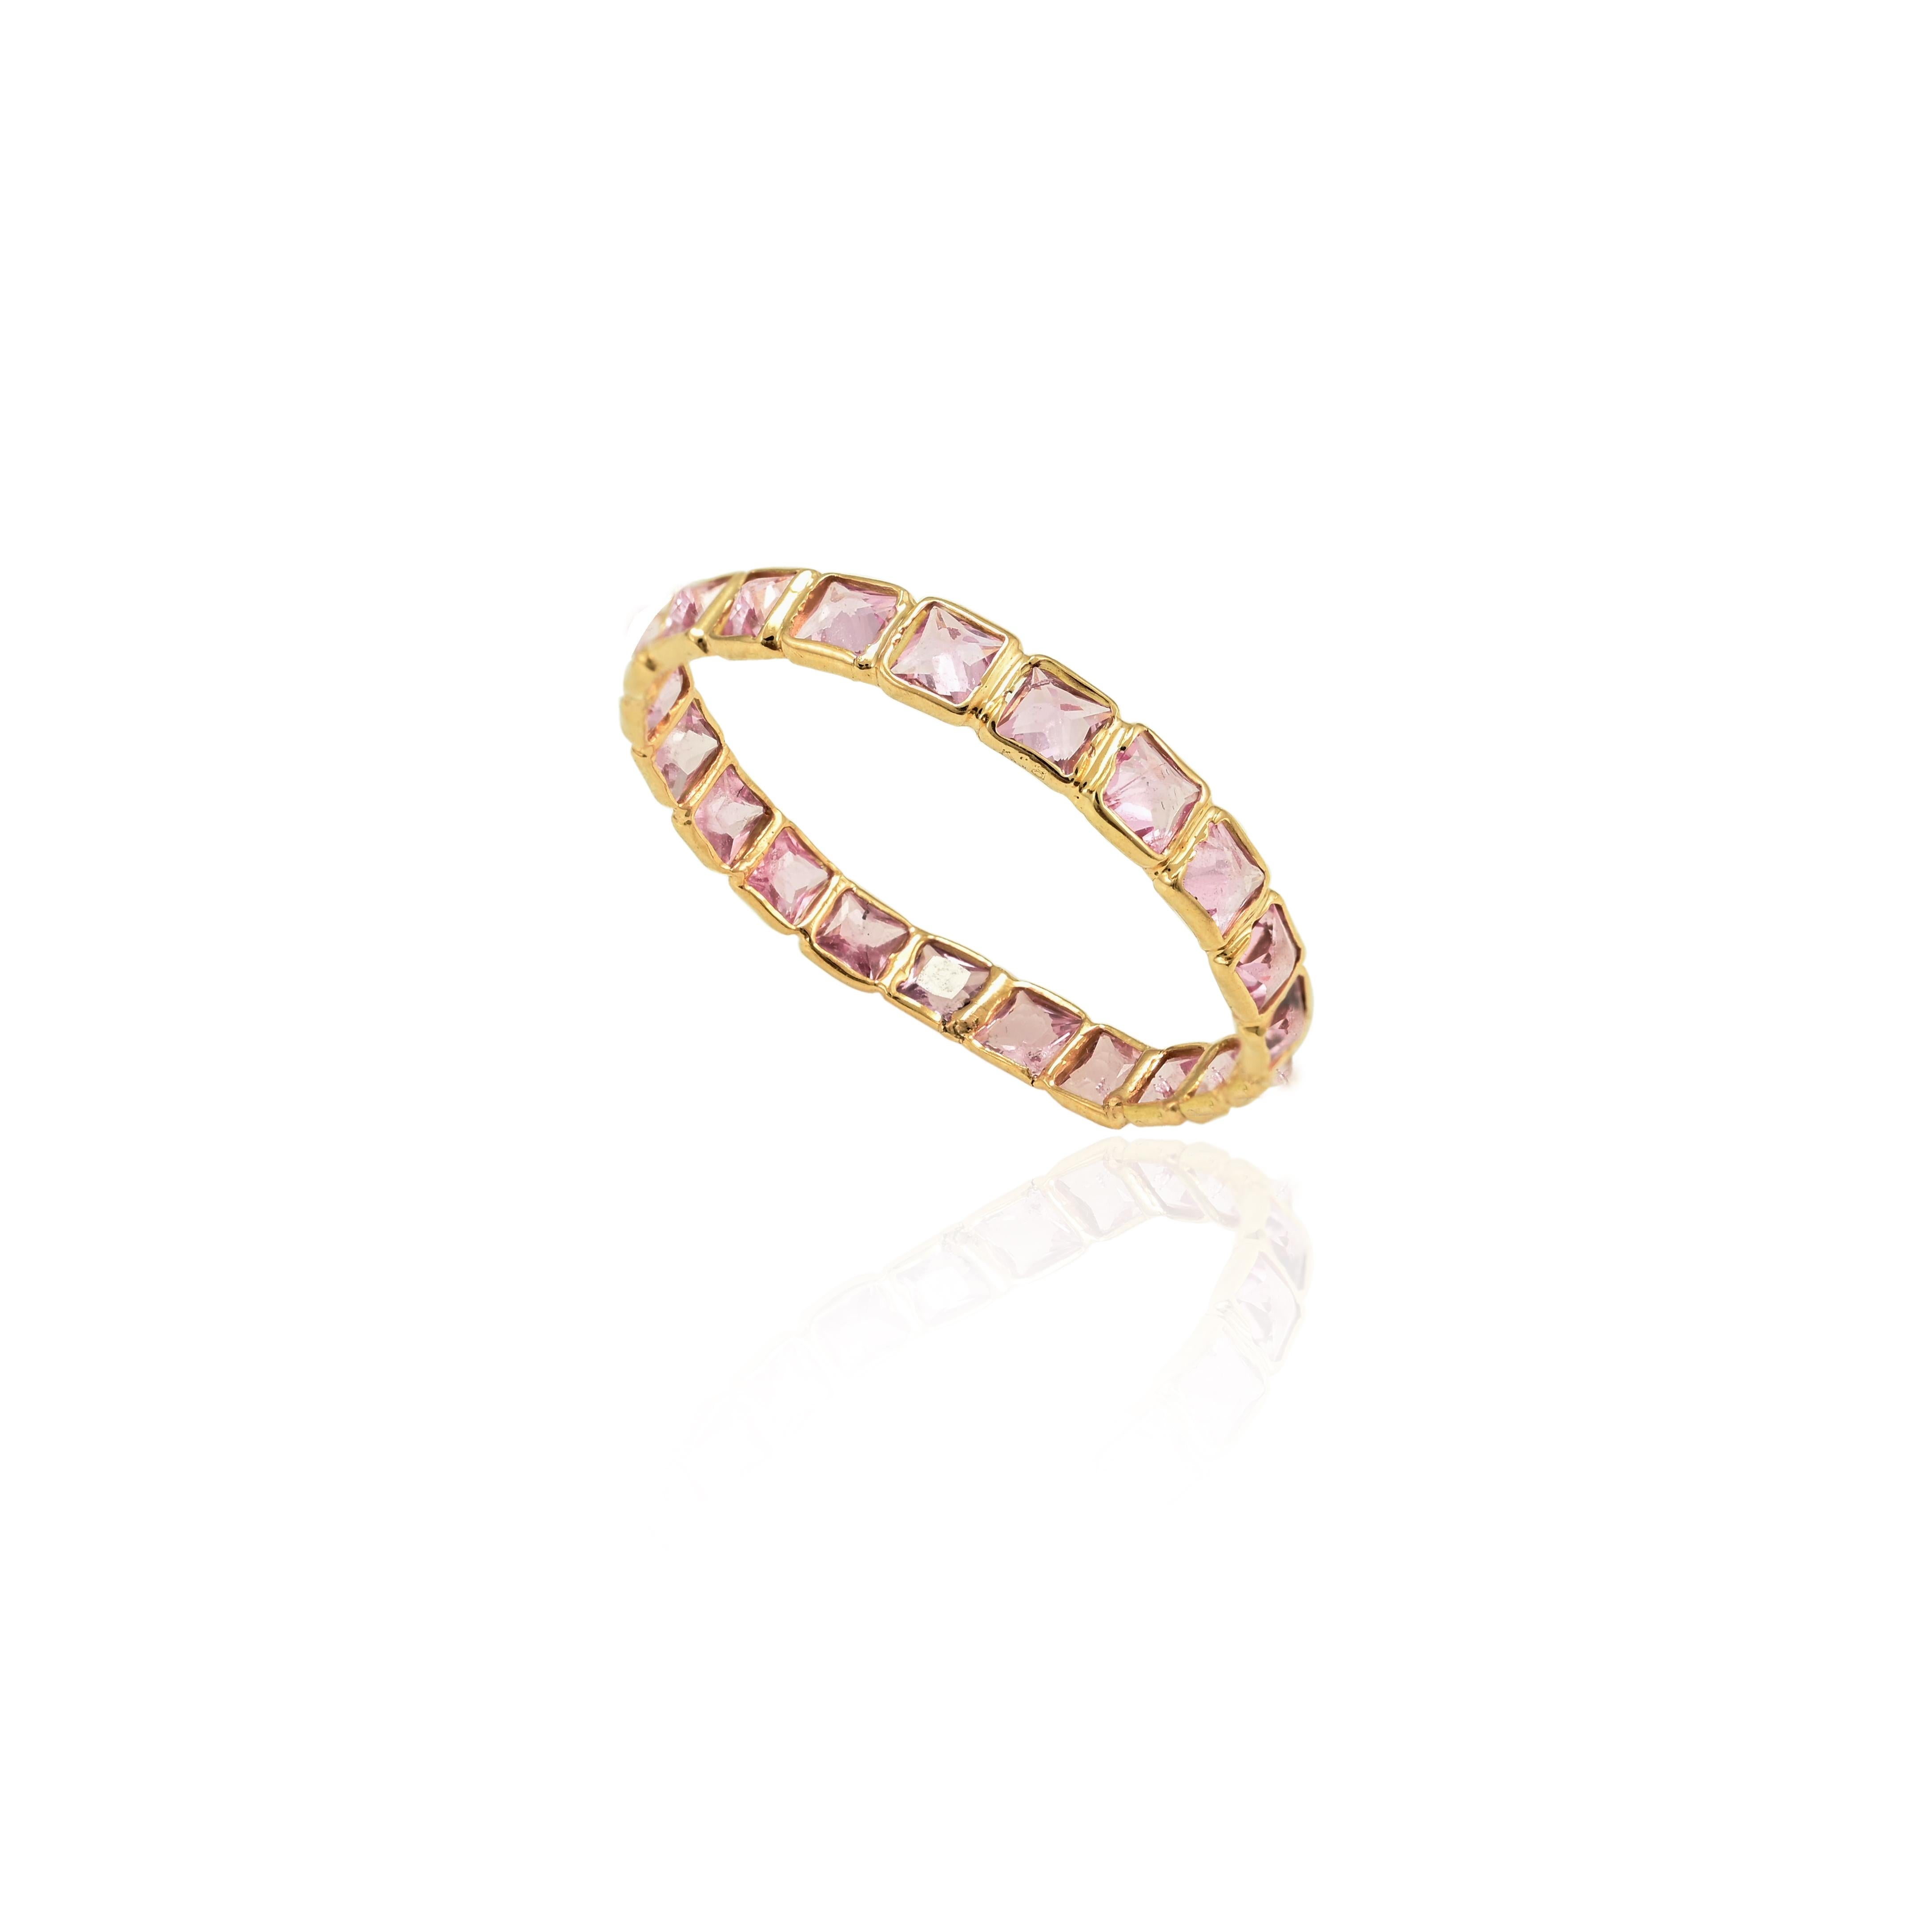 For Sale:  18 Karat Solid Yellow Gold Thin Pink Sapphire Eternity Band Ring, Everyday Ring  4